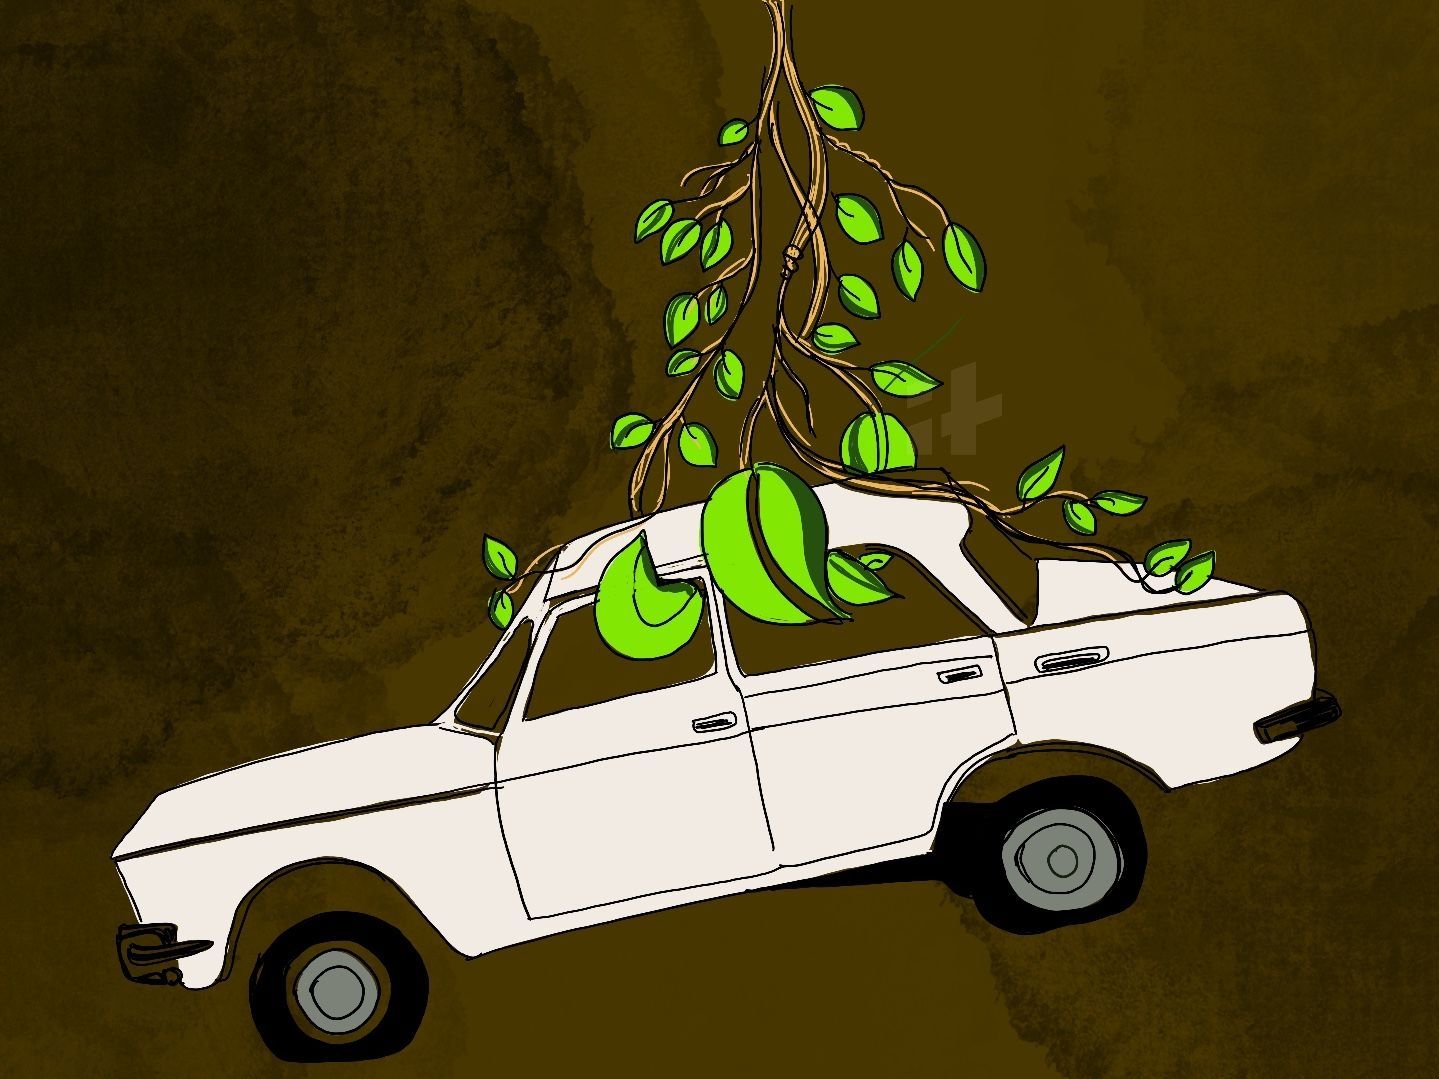 india's vehicle scrappage policy - everything car owners should know